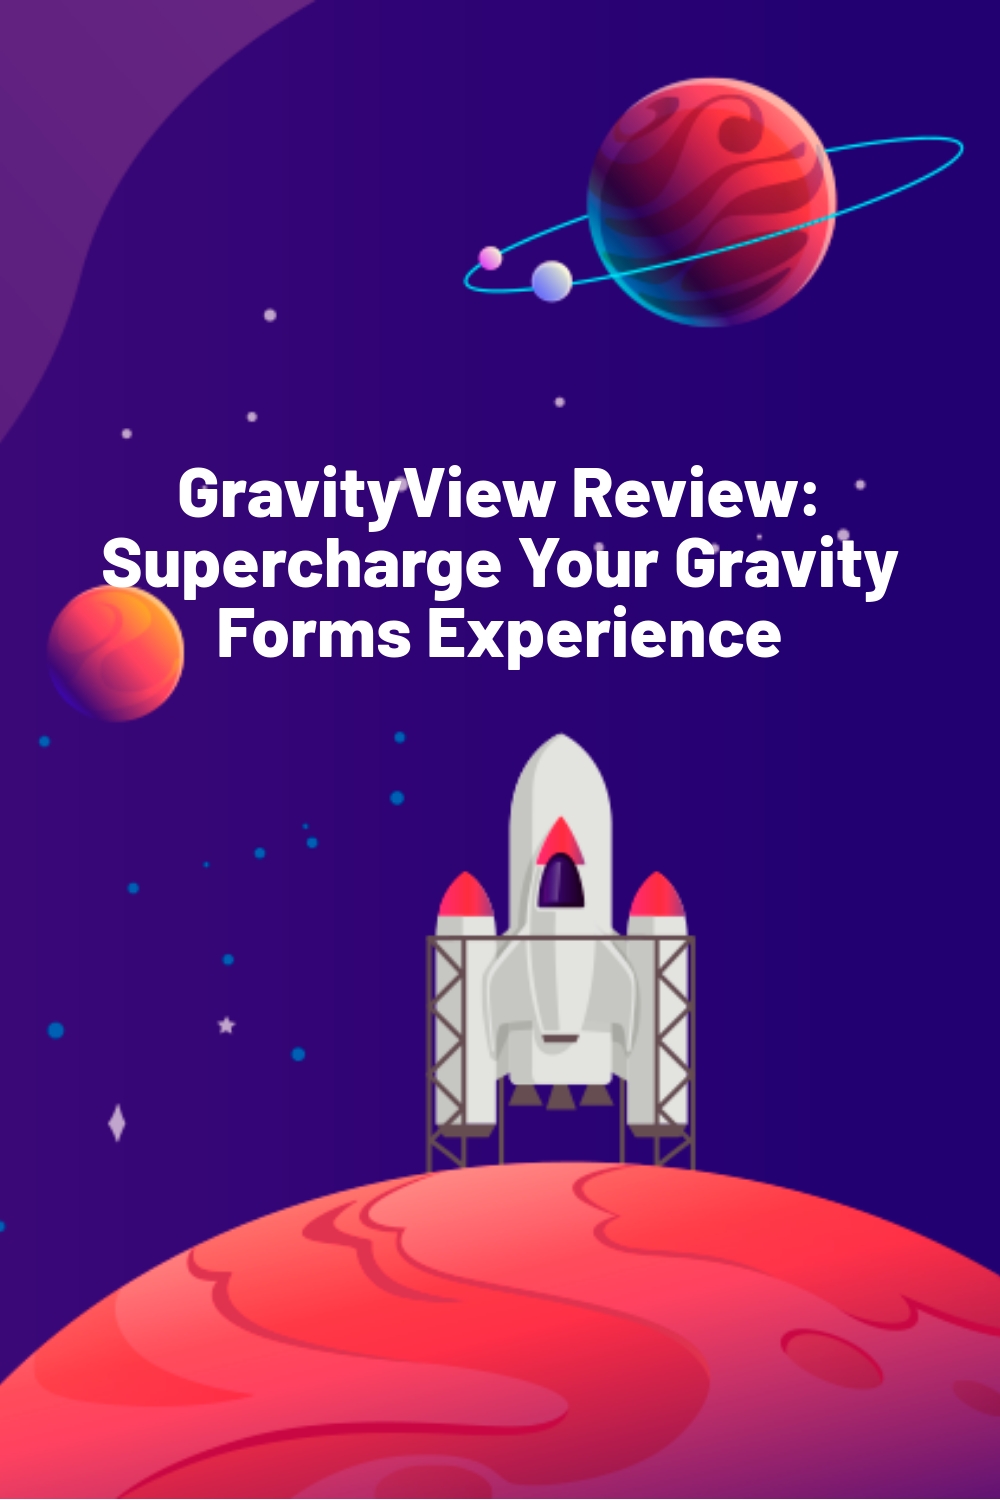 GravityView Review: Supercharge Your Gravity Forms Experience